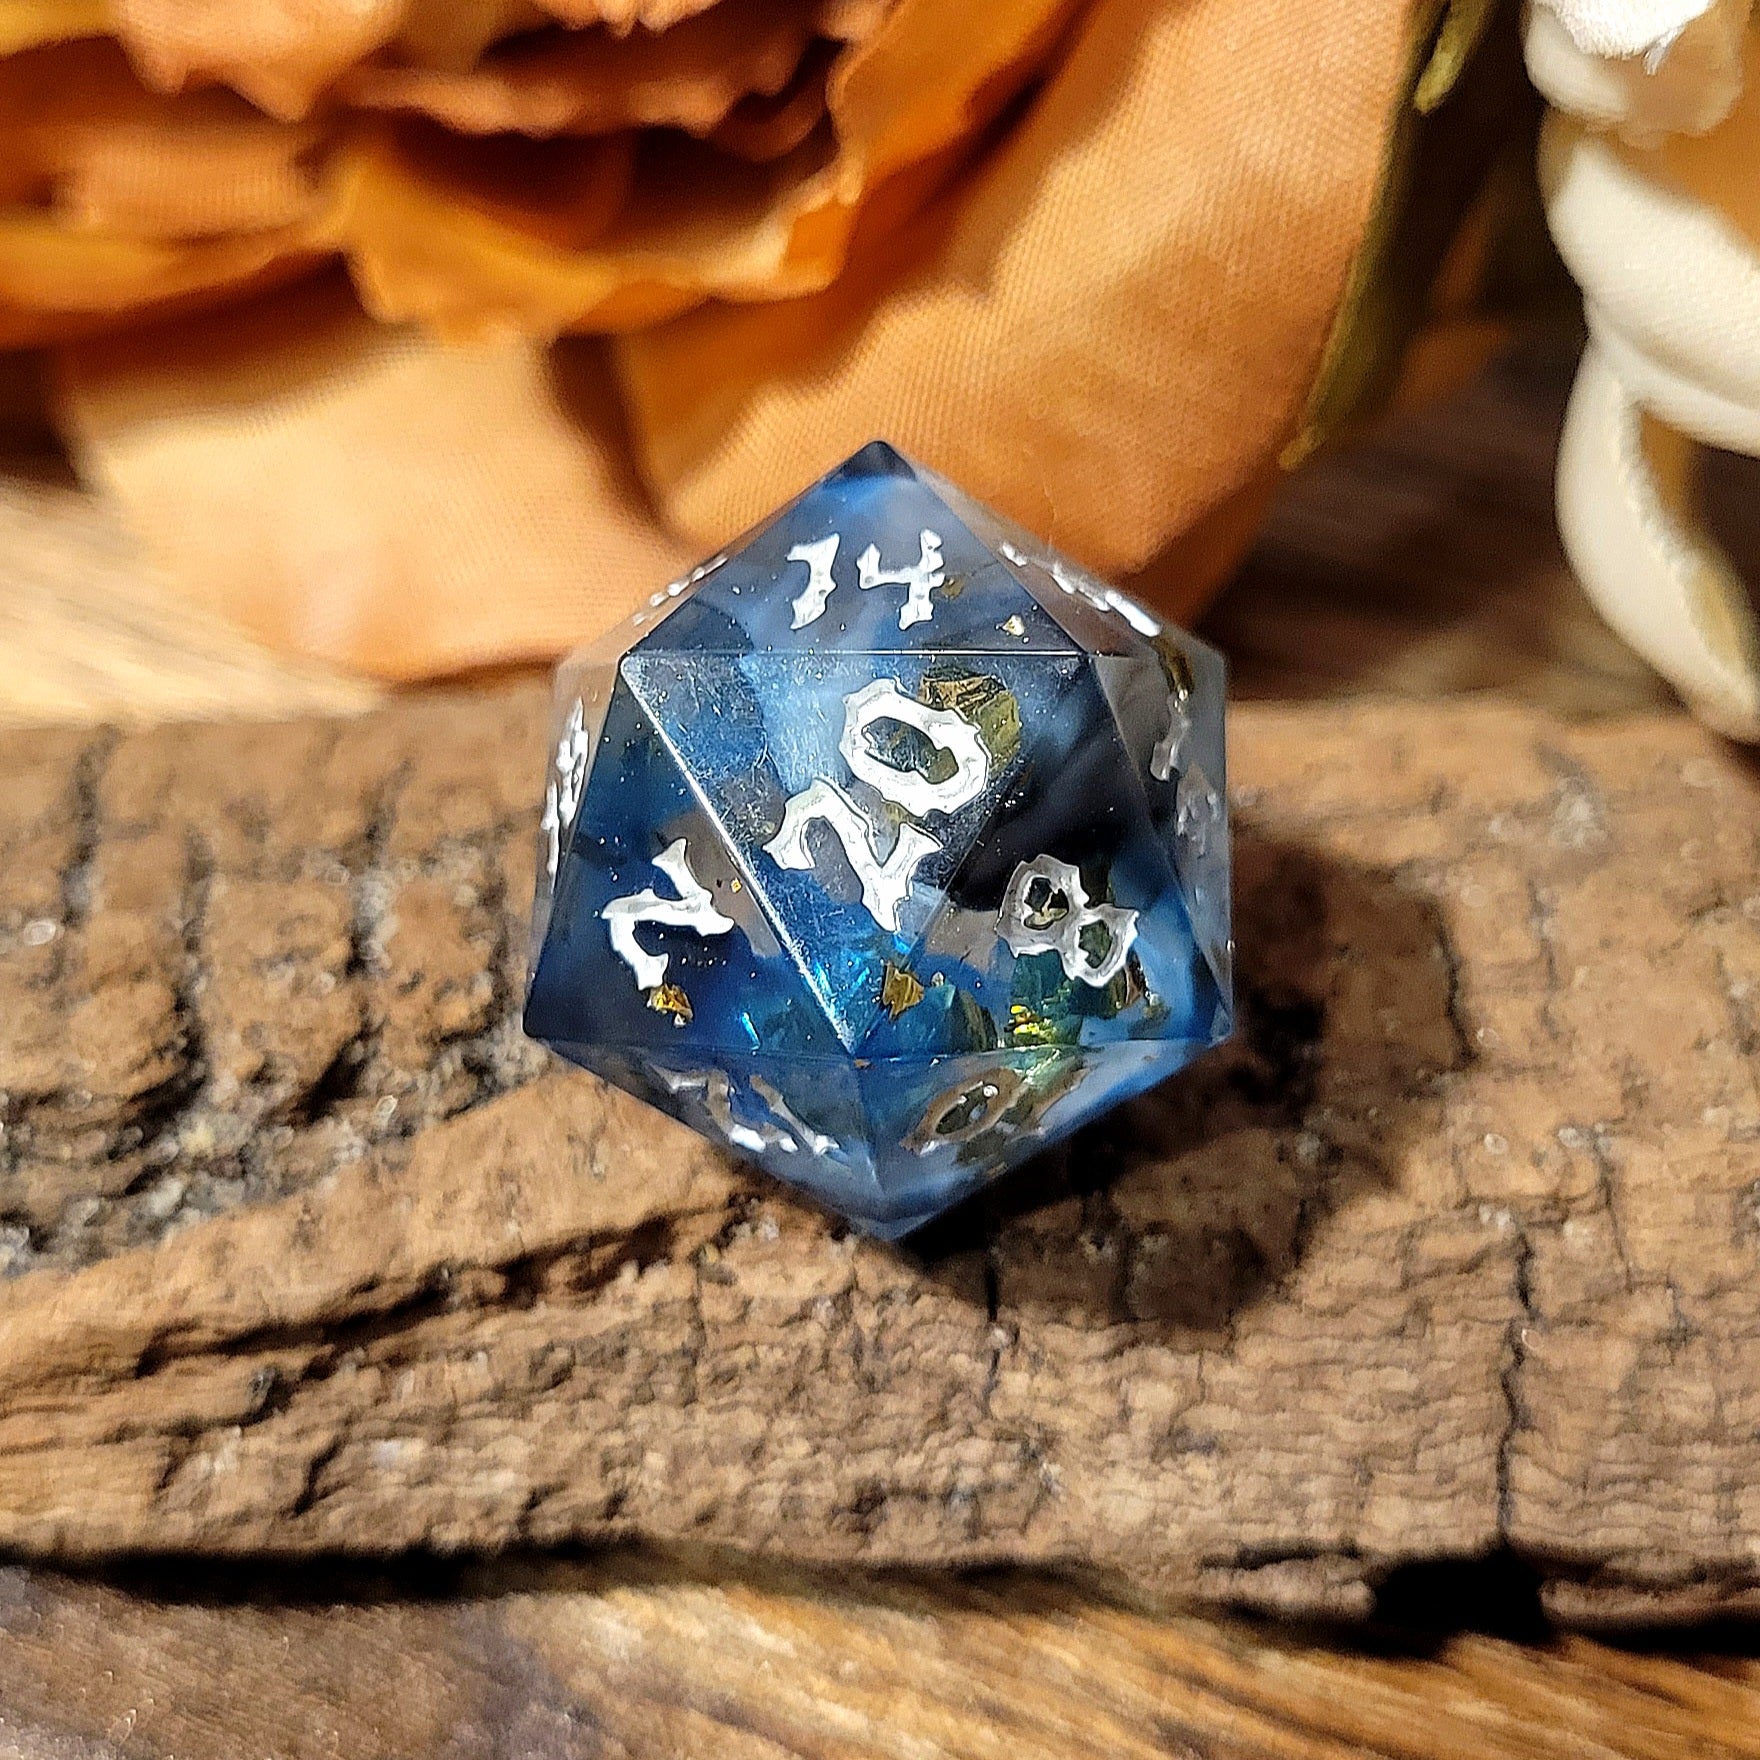 A twenty-sided die that has a clear base with black, white, and Oxford blue drips. The font is Sugar Bee RPG's signature death metal font, and is inked in white. The most prominent numbers are 20, 14, 2, and 8. Large gold foil flakes are suspended within the die. This angle is a beautiful bright blue with gold flake accents.